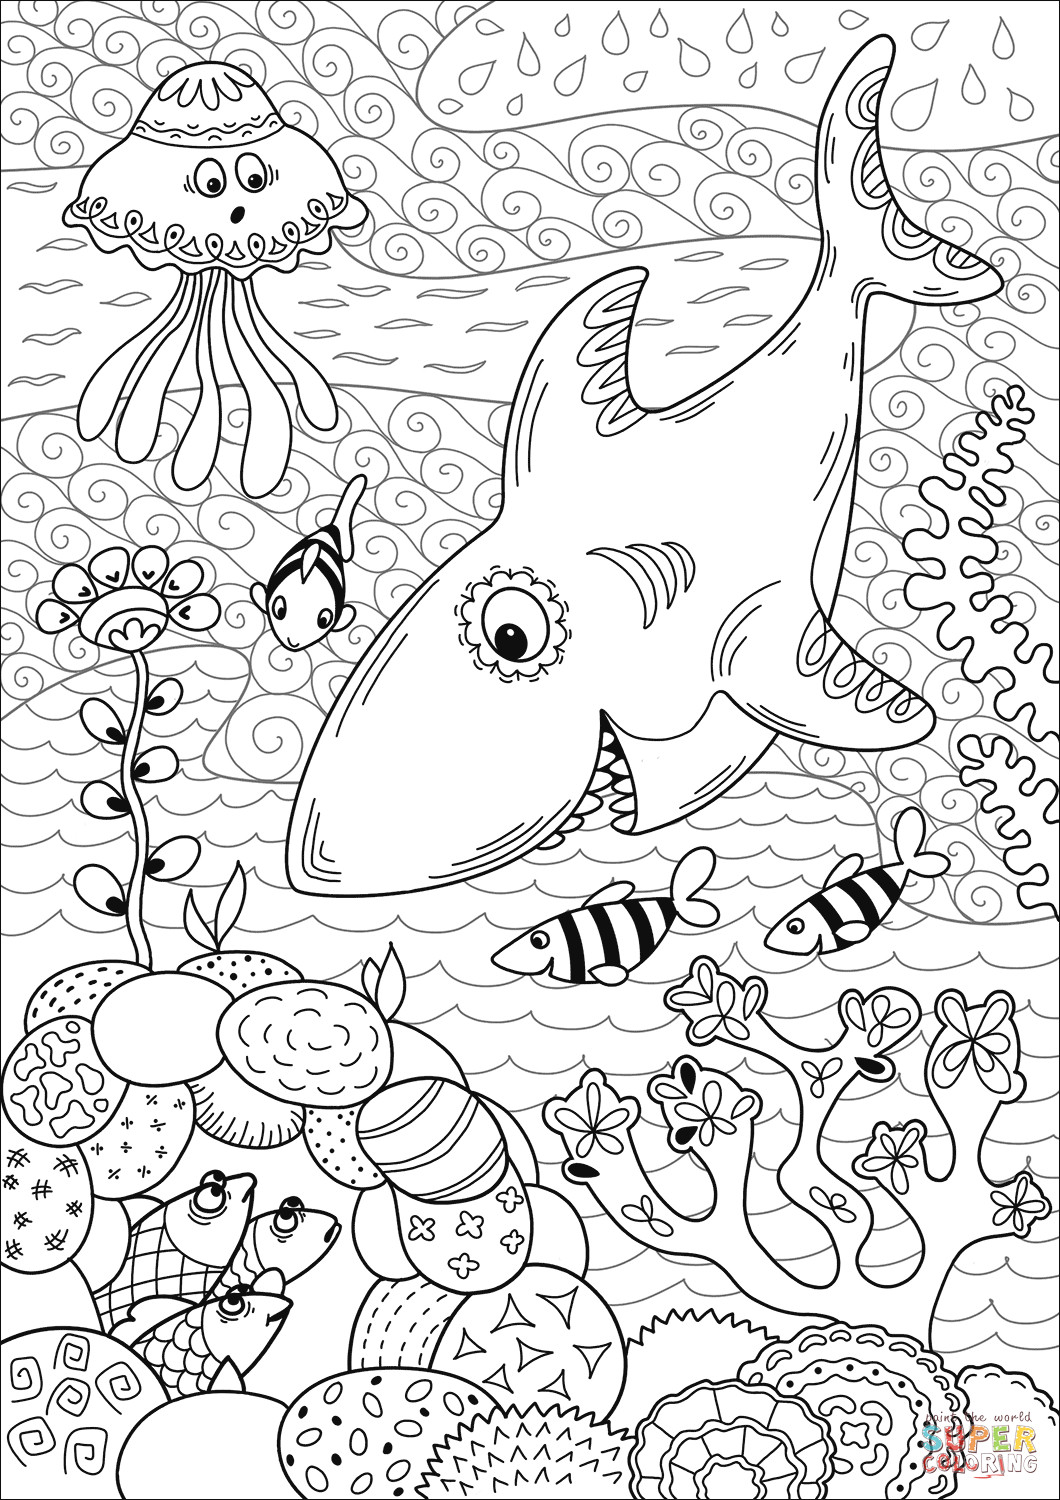 Coral Reef Coloring Pages
 Shark Hunting in Coral Reef coloring page